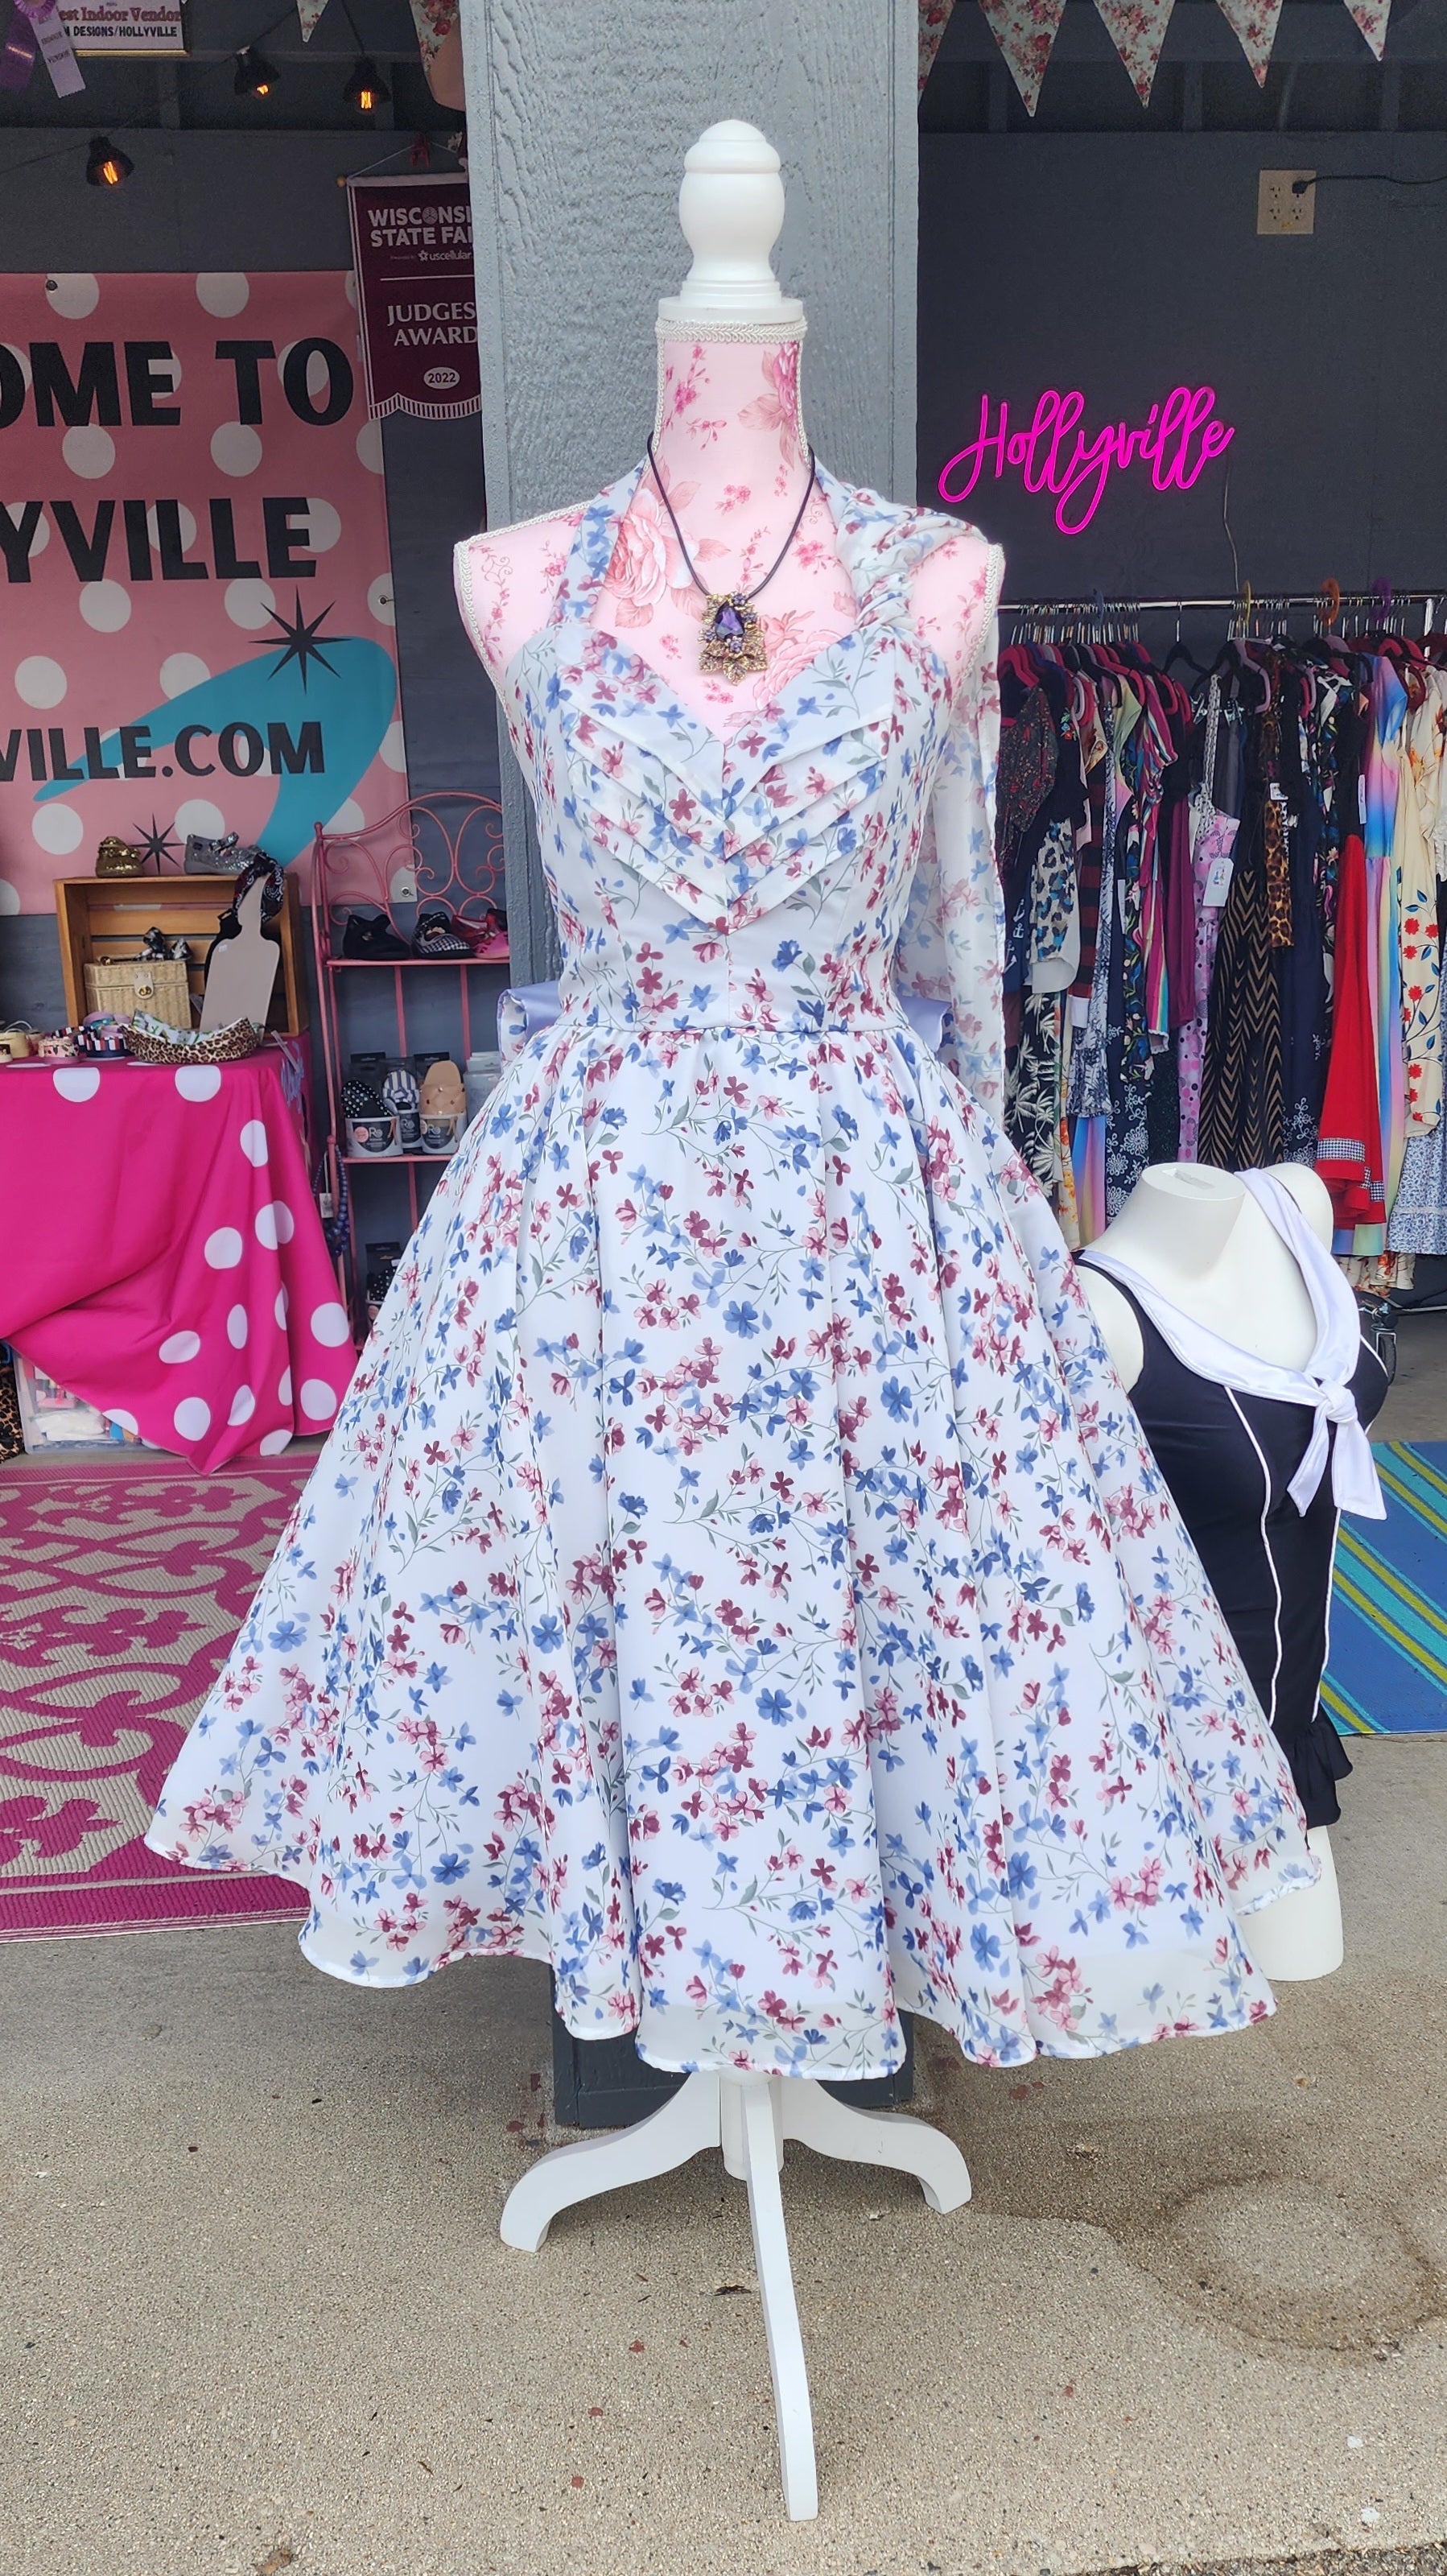 Floral Chiffon 1950's inspired dress

Pleated bodice on a chevron, fully lined and boned

Three layers of a full circle skirt with pockets